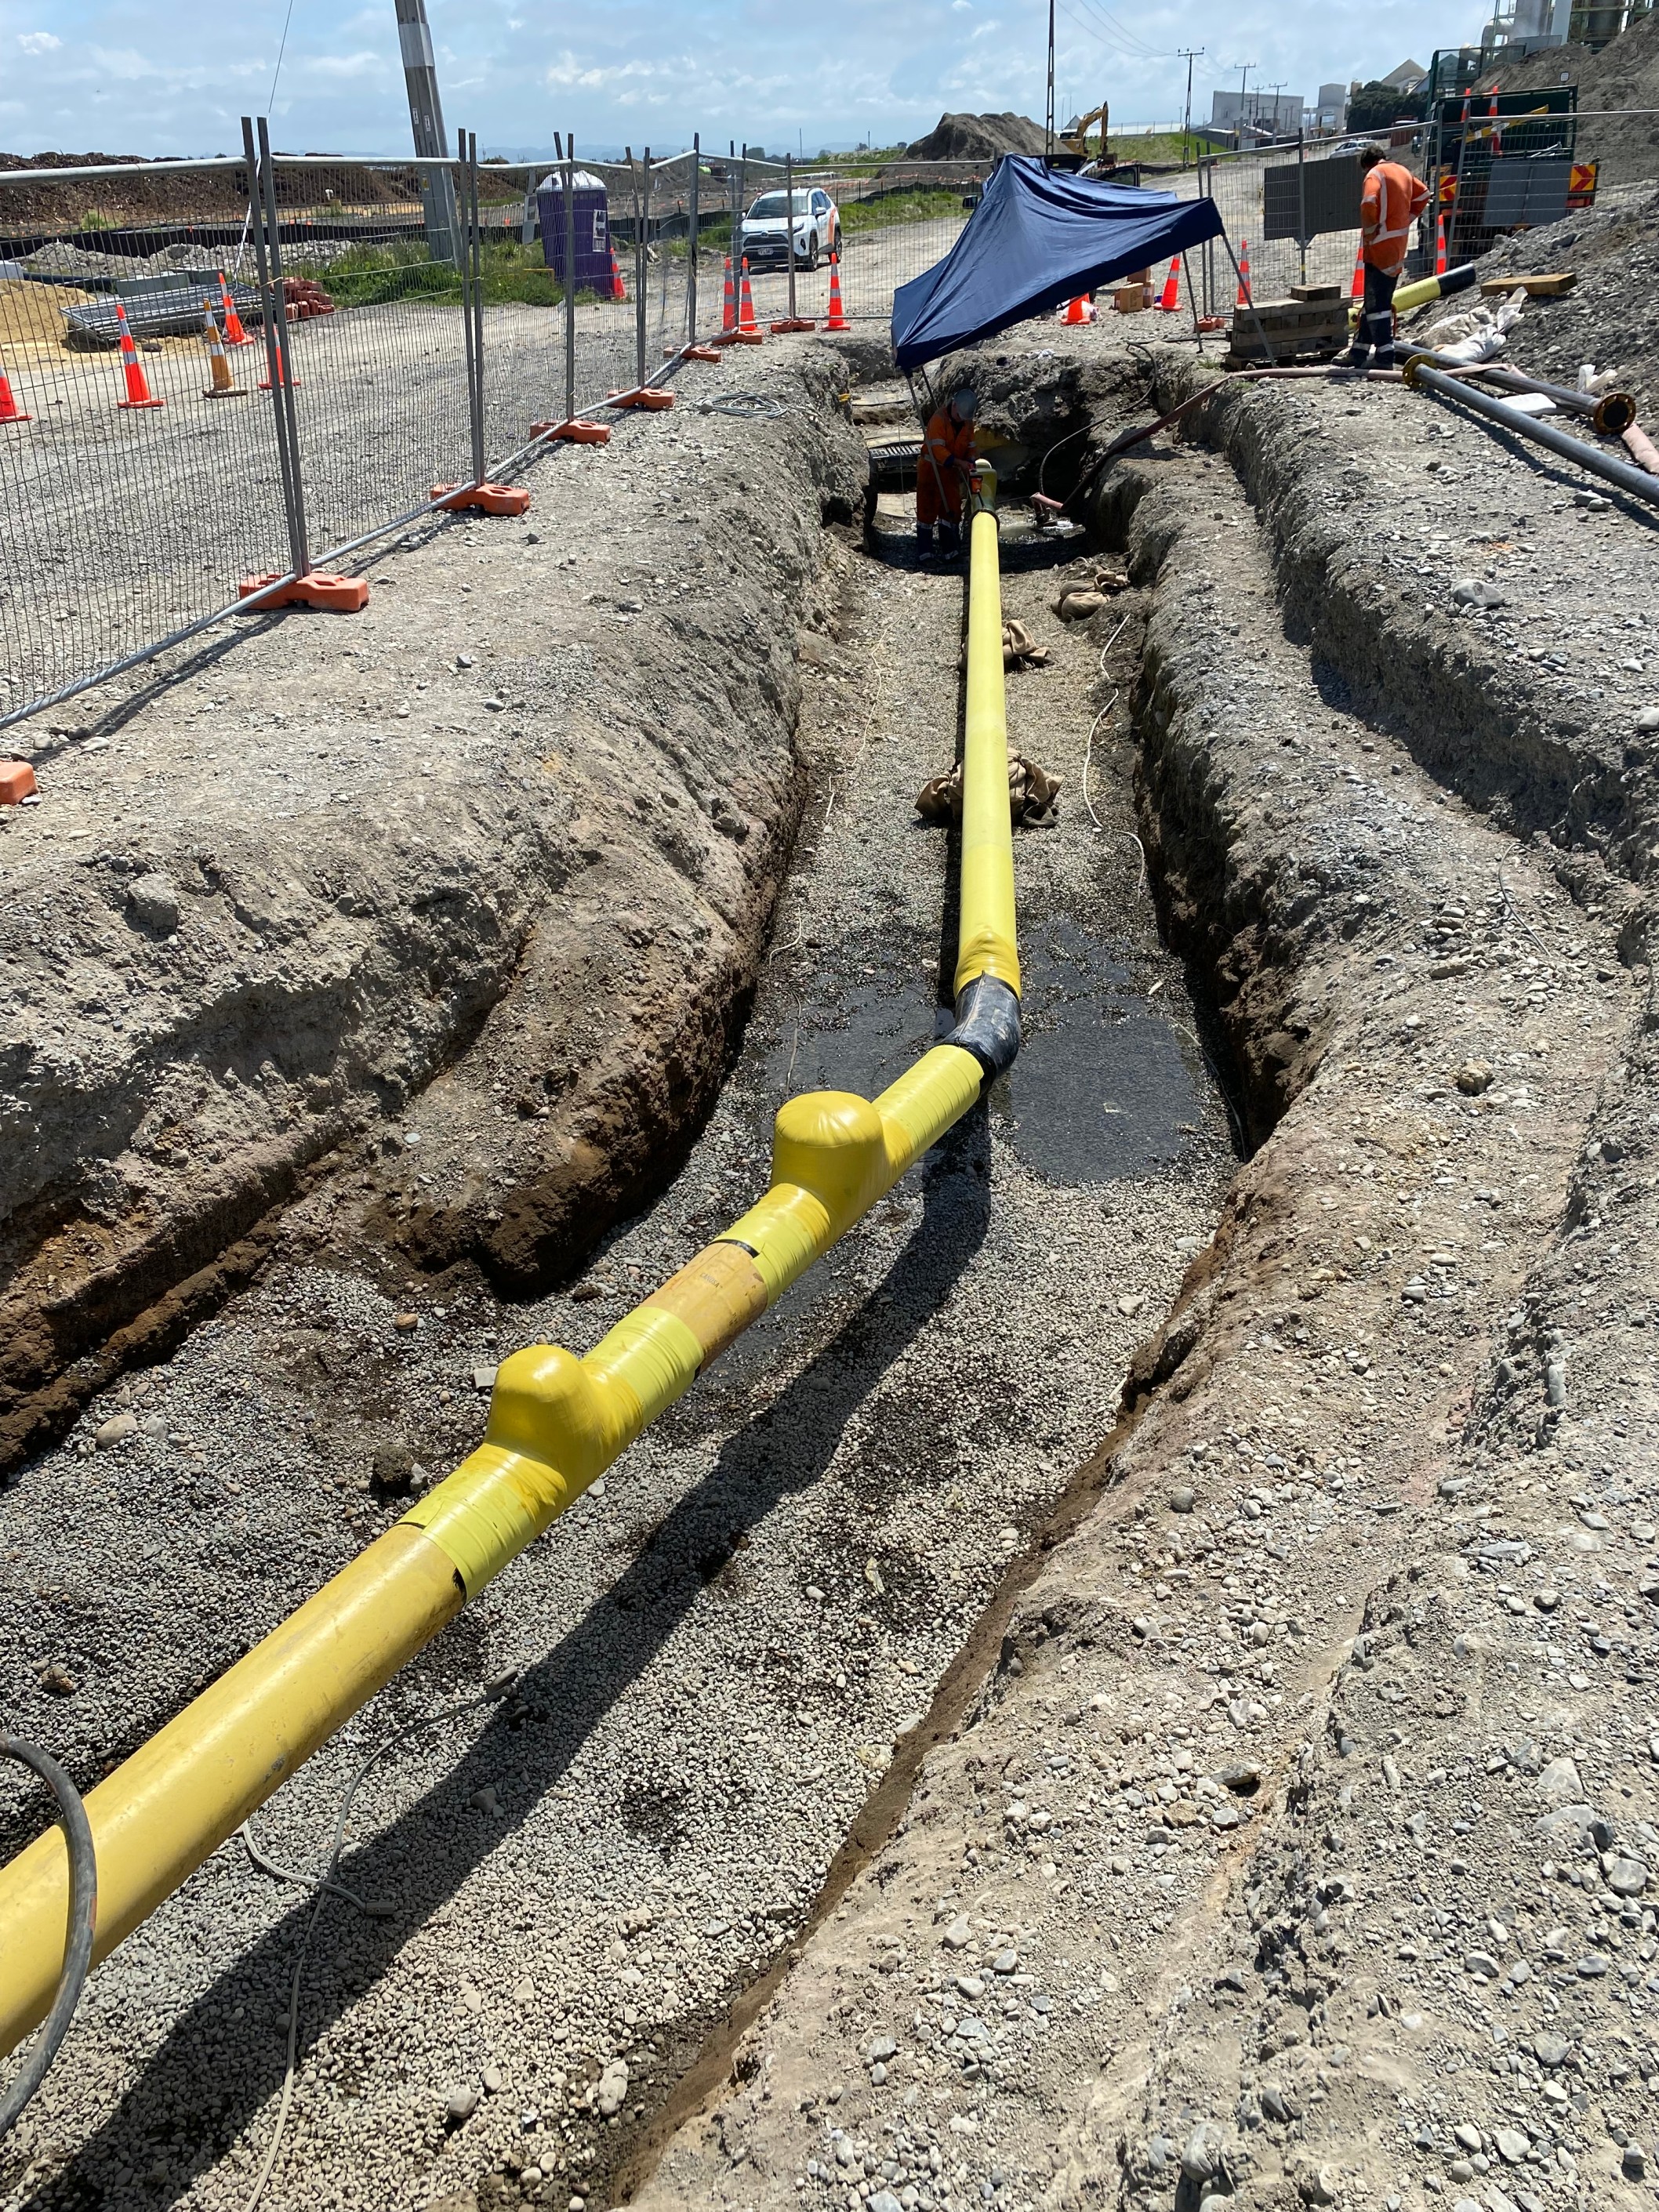 A yellow gas pipe in the ground.